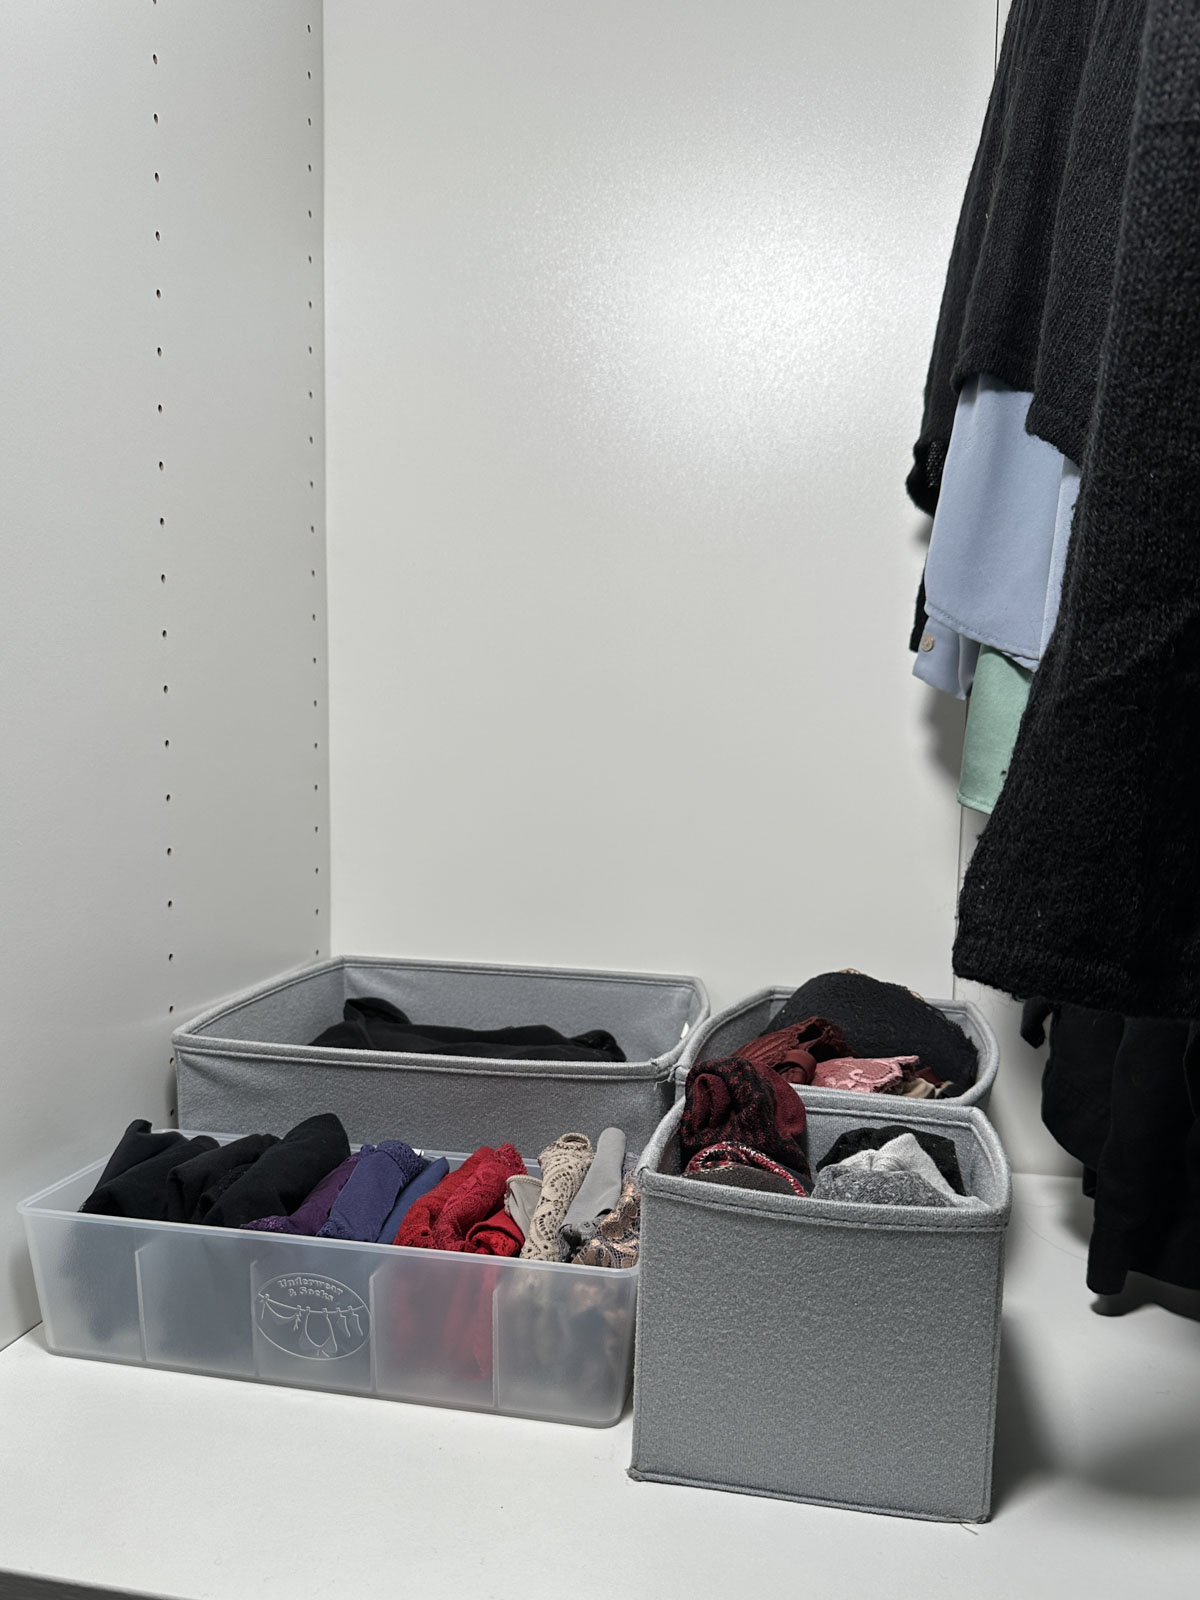 Use Foldable Storage Boxes for Underwear